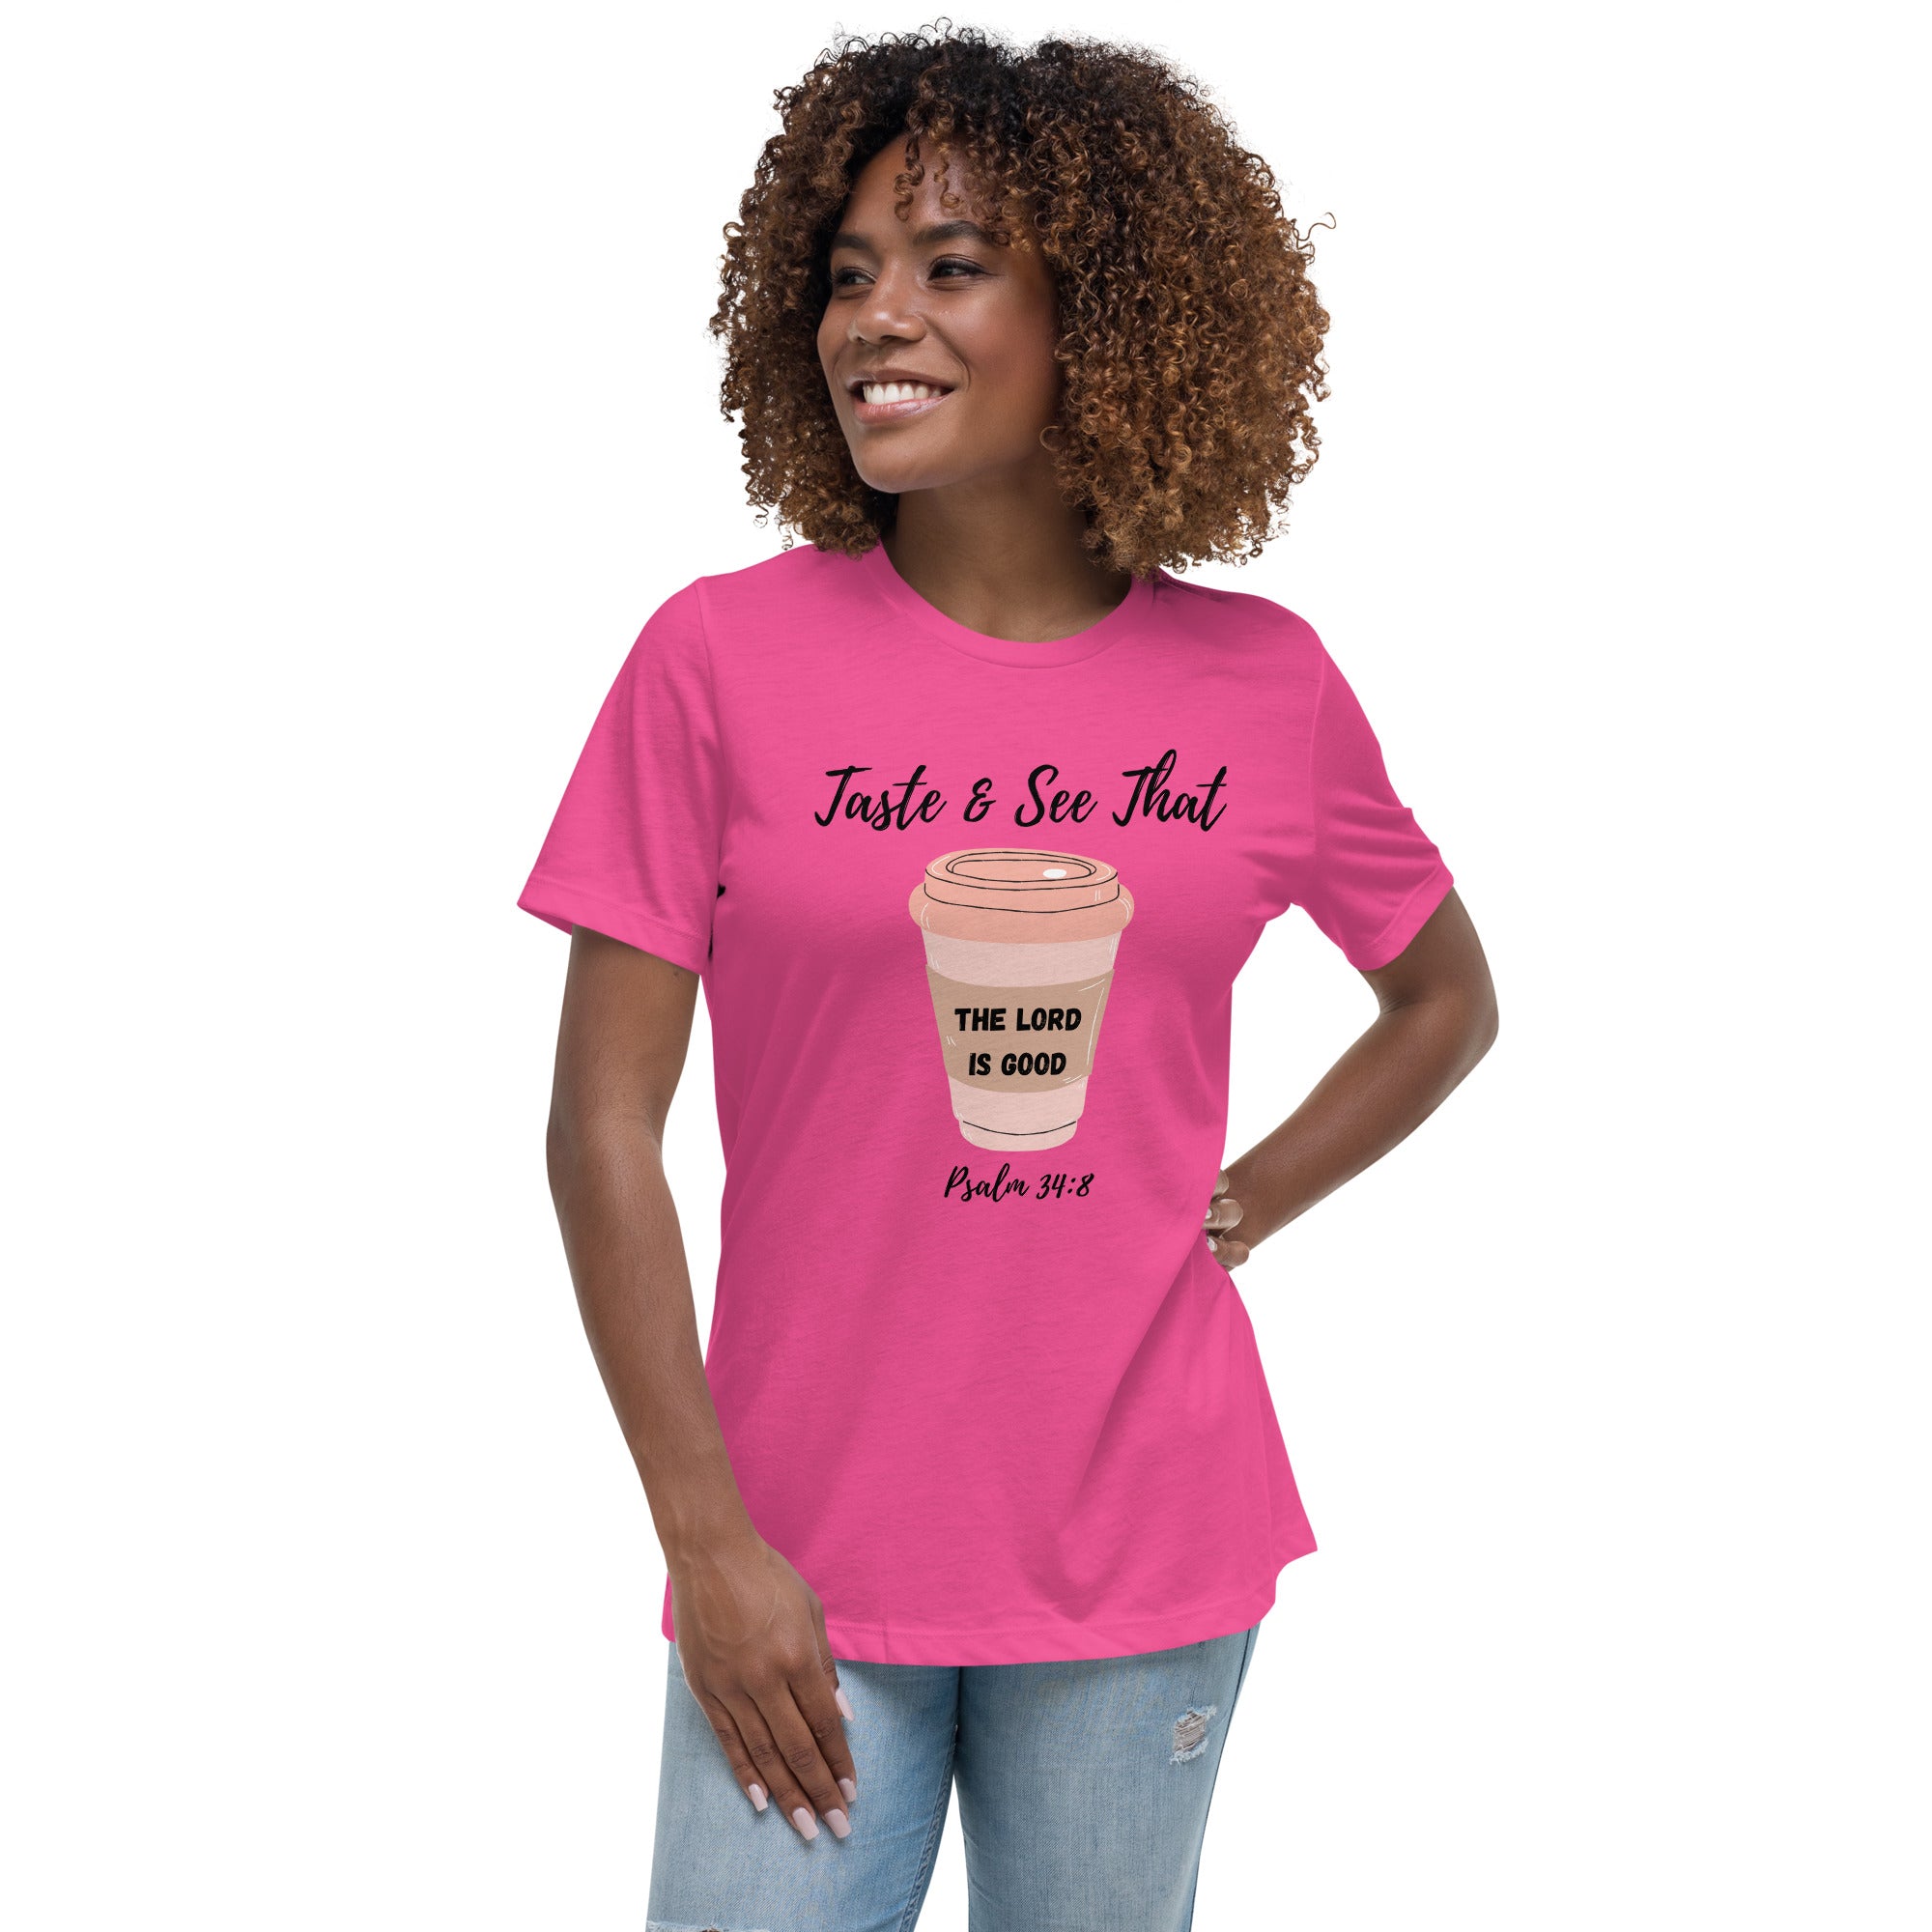 The LORD is Good Women's Relaxed T-Shirt